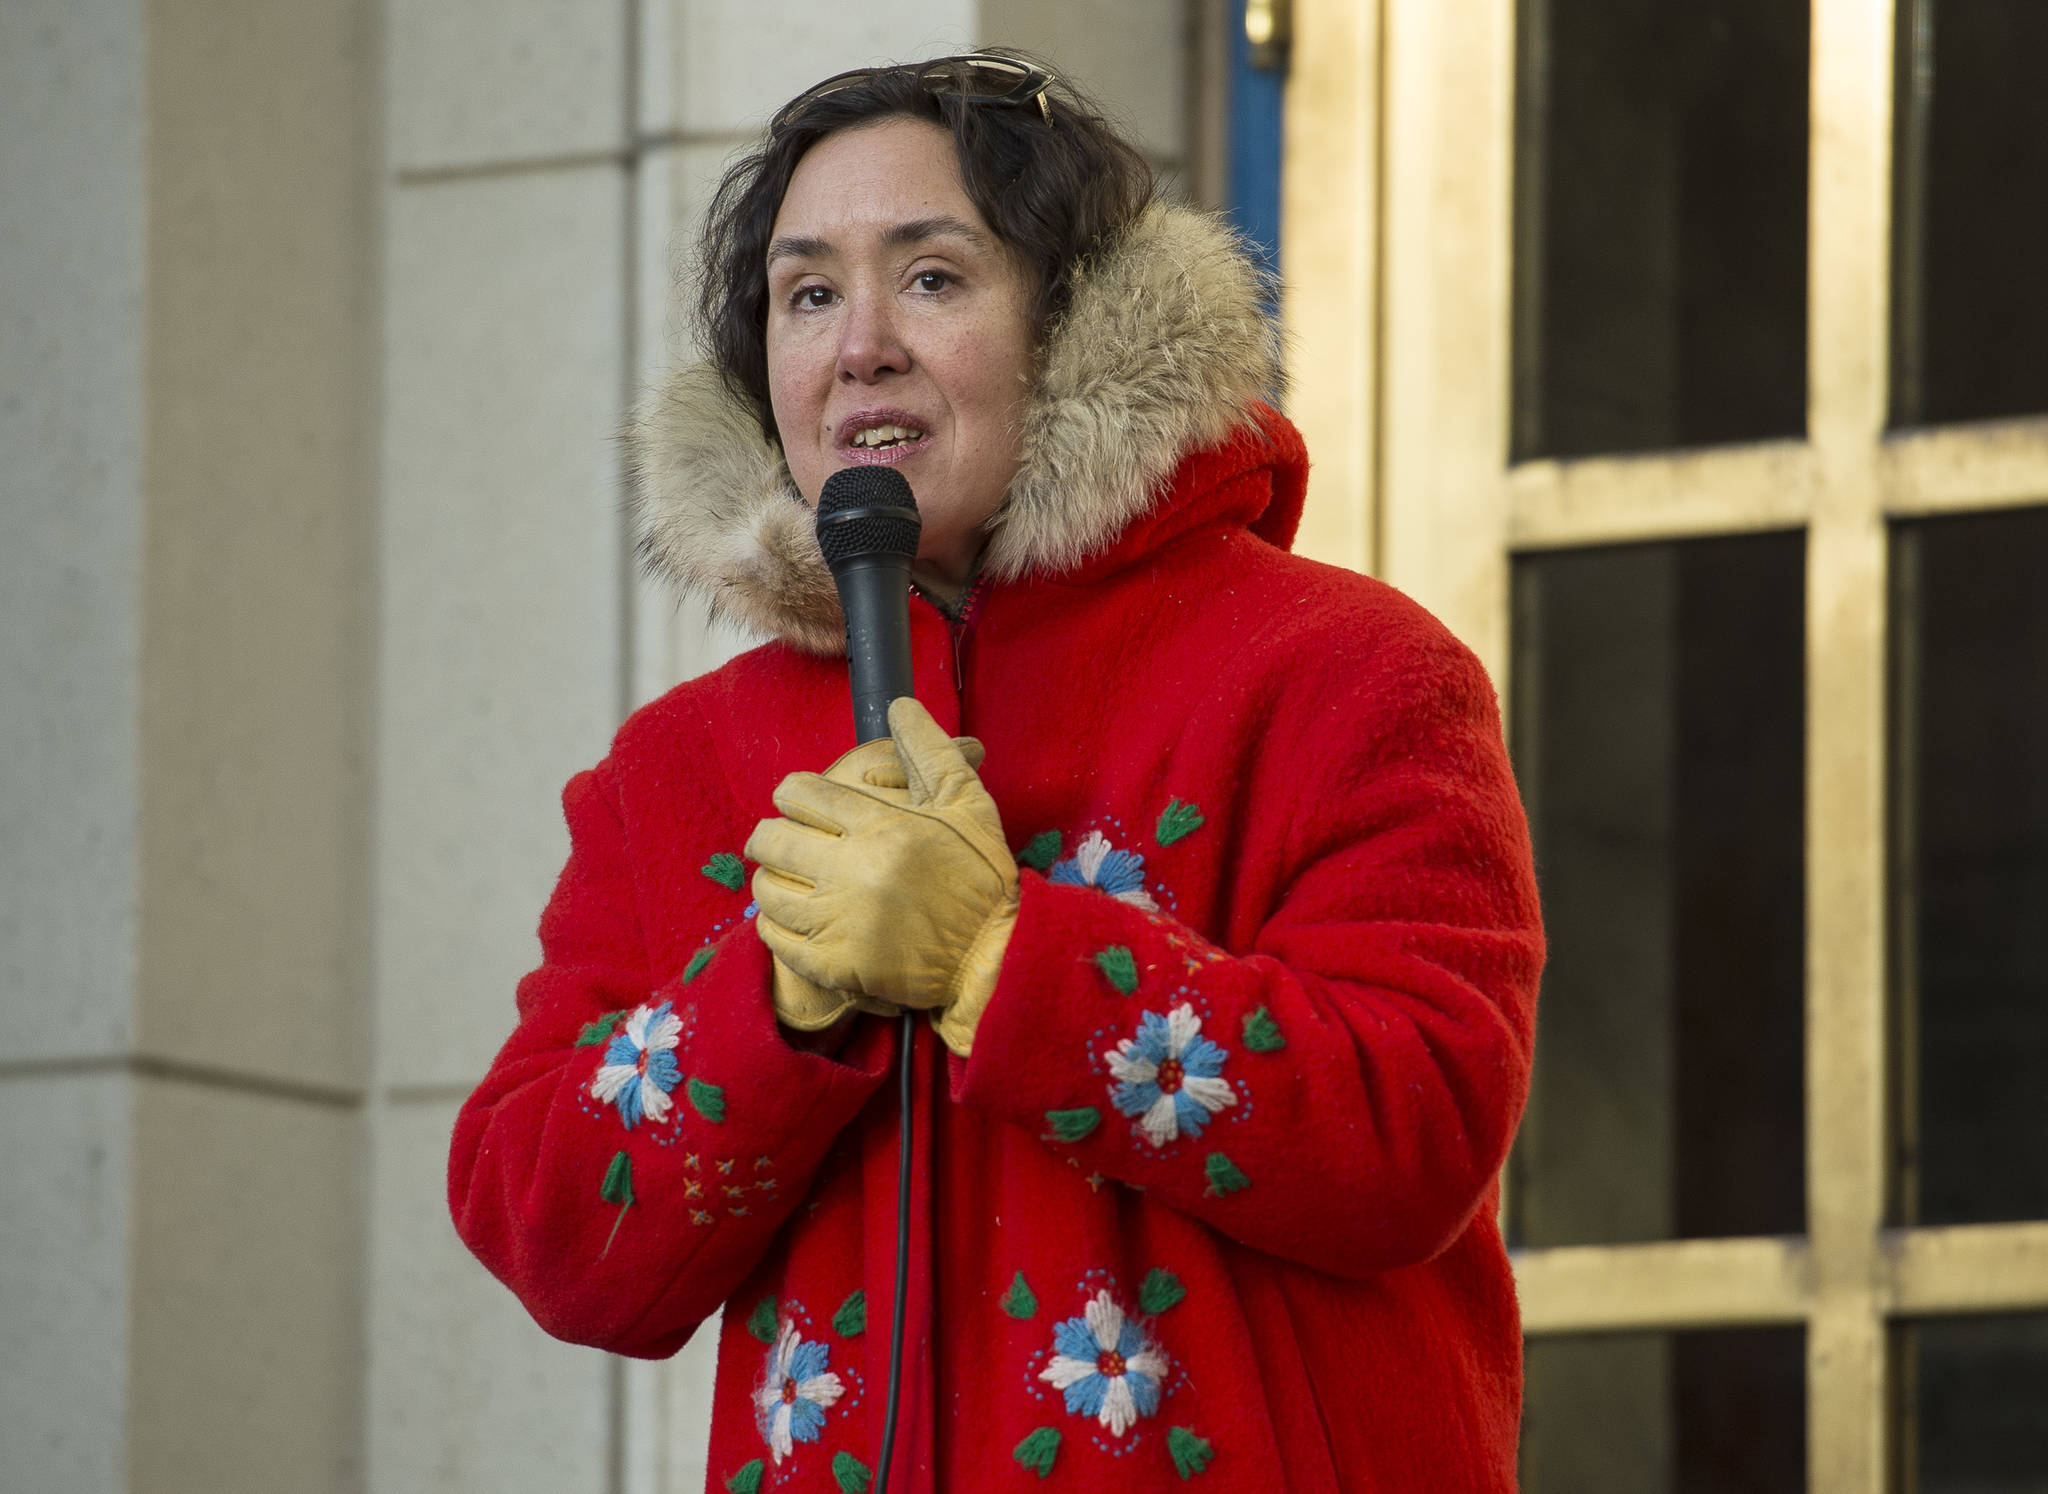 Melanie Brown speaks at the Women’s March on Juneau in front of the Alaska State Capitol on Saturday, Jan. 19, 2019. (Michael Penn | Juneau Empire)